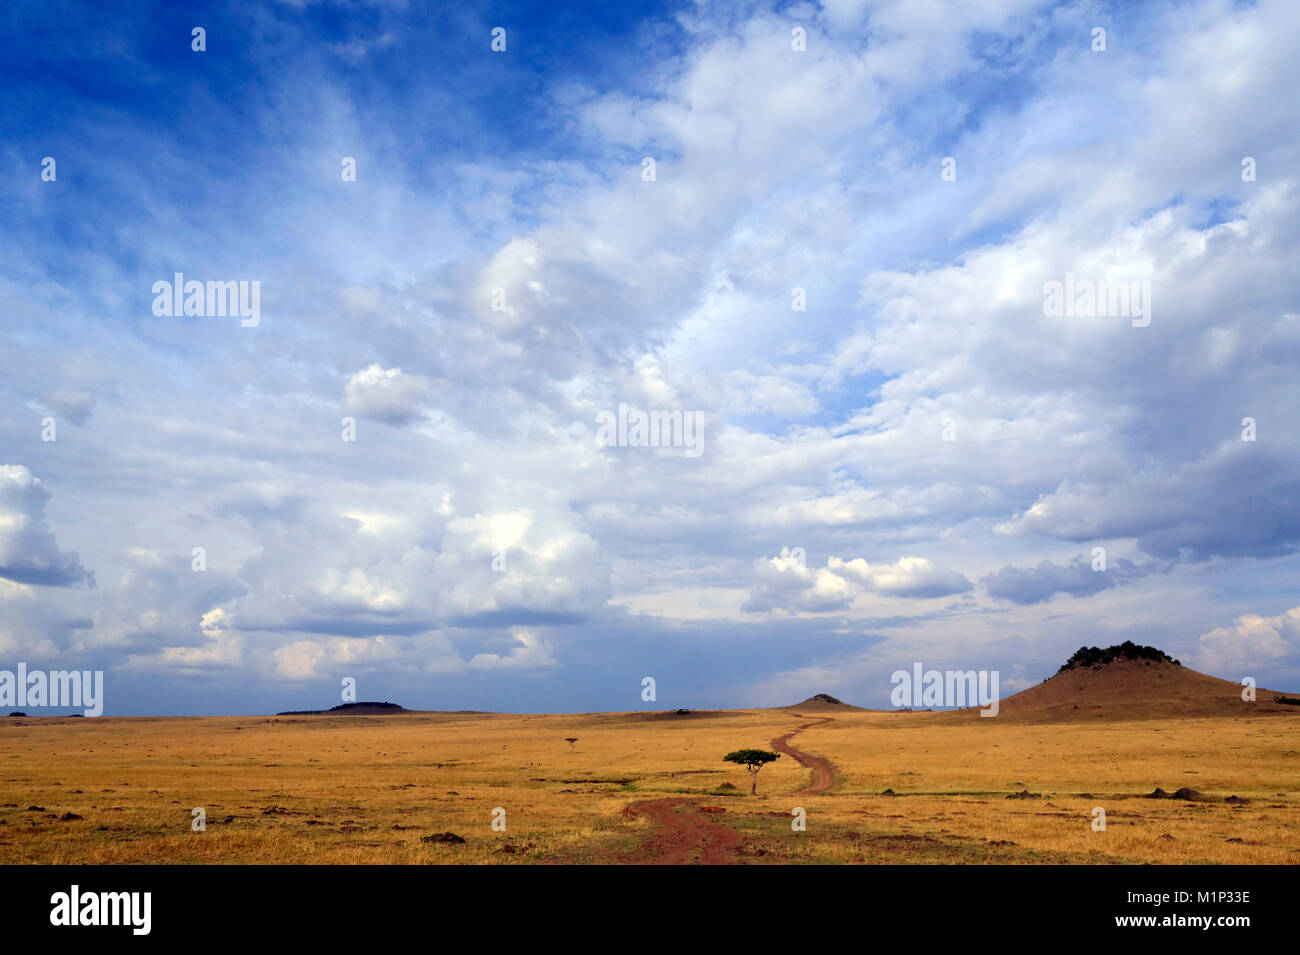 African savanna, golden plains against blue sky with clouds, Masai Mara Game Reserve, Kenya, East Africa, Africa Stock Photo